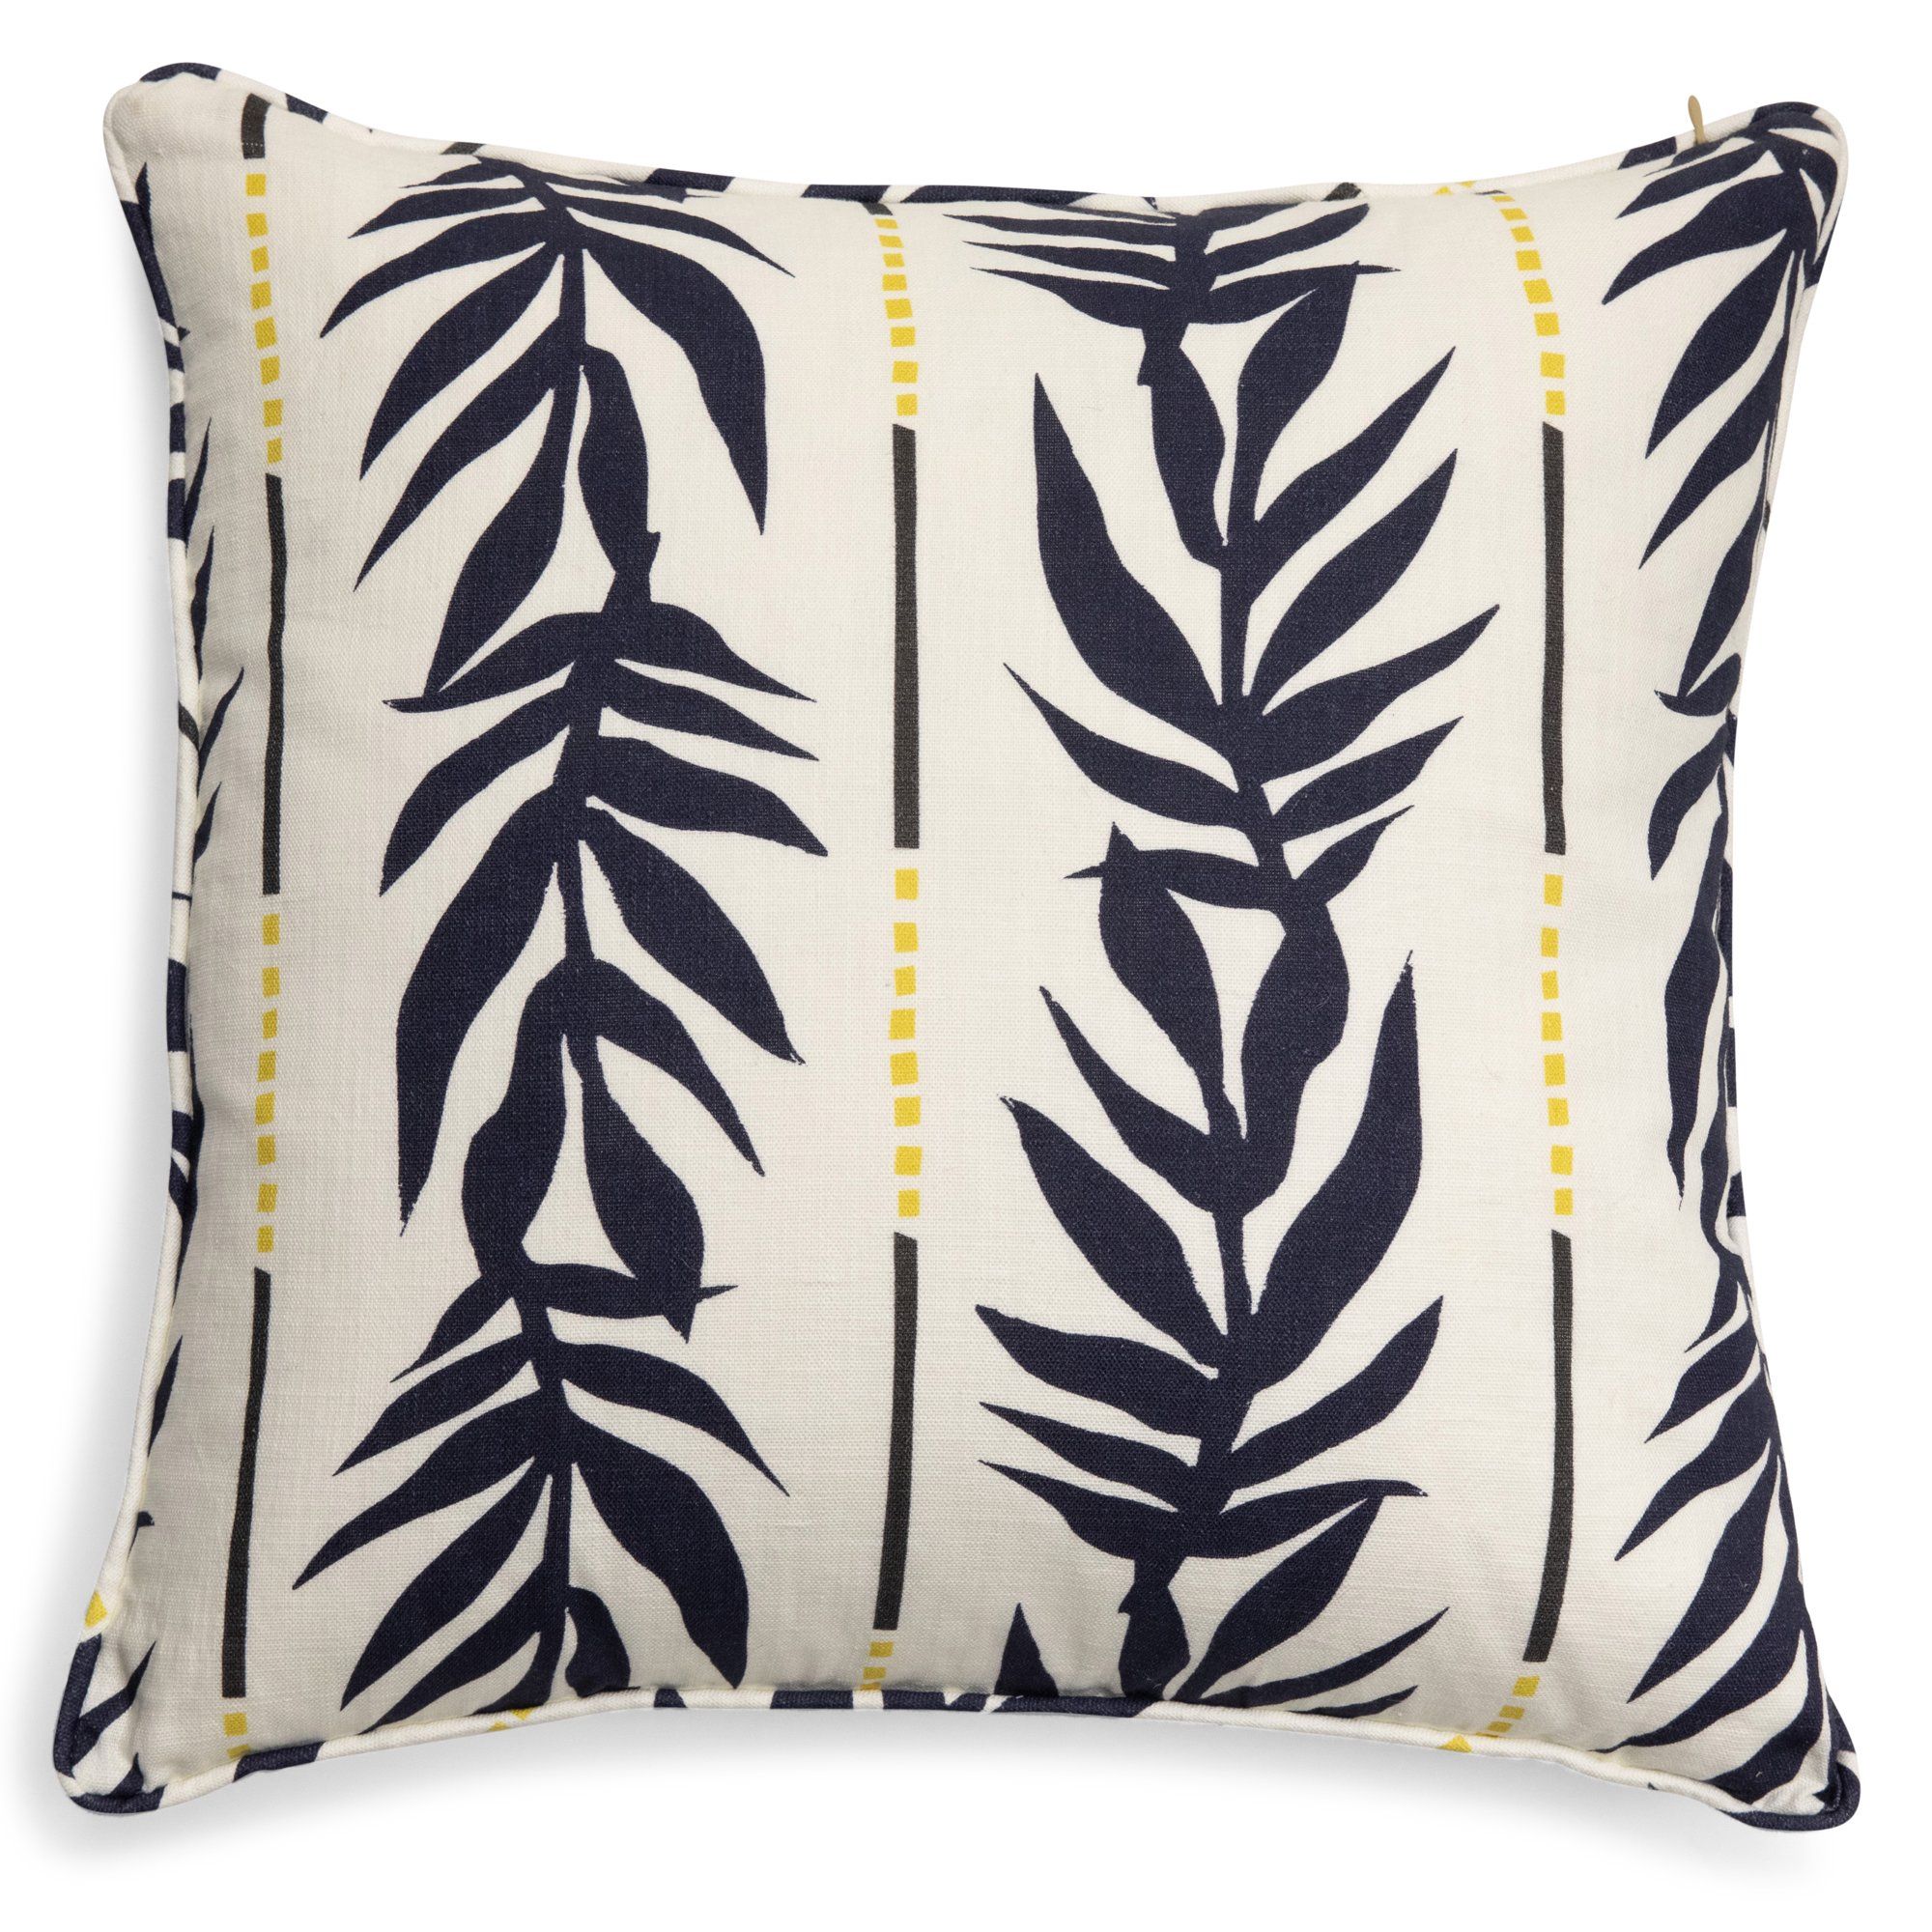 Vintage Palm Decorative Throw Pillow, 20x20" by Drew Barrymore Flower Home | Walmart (US)